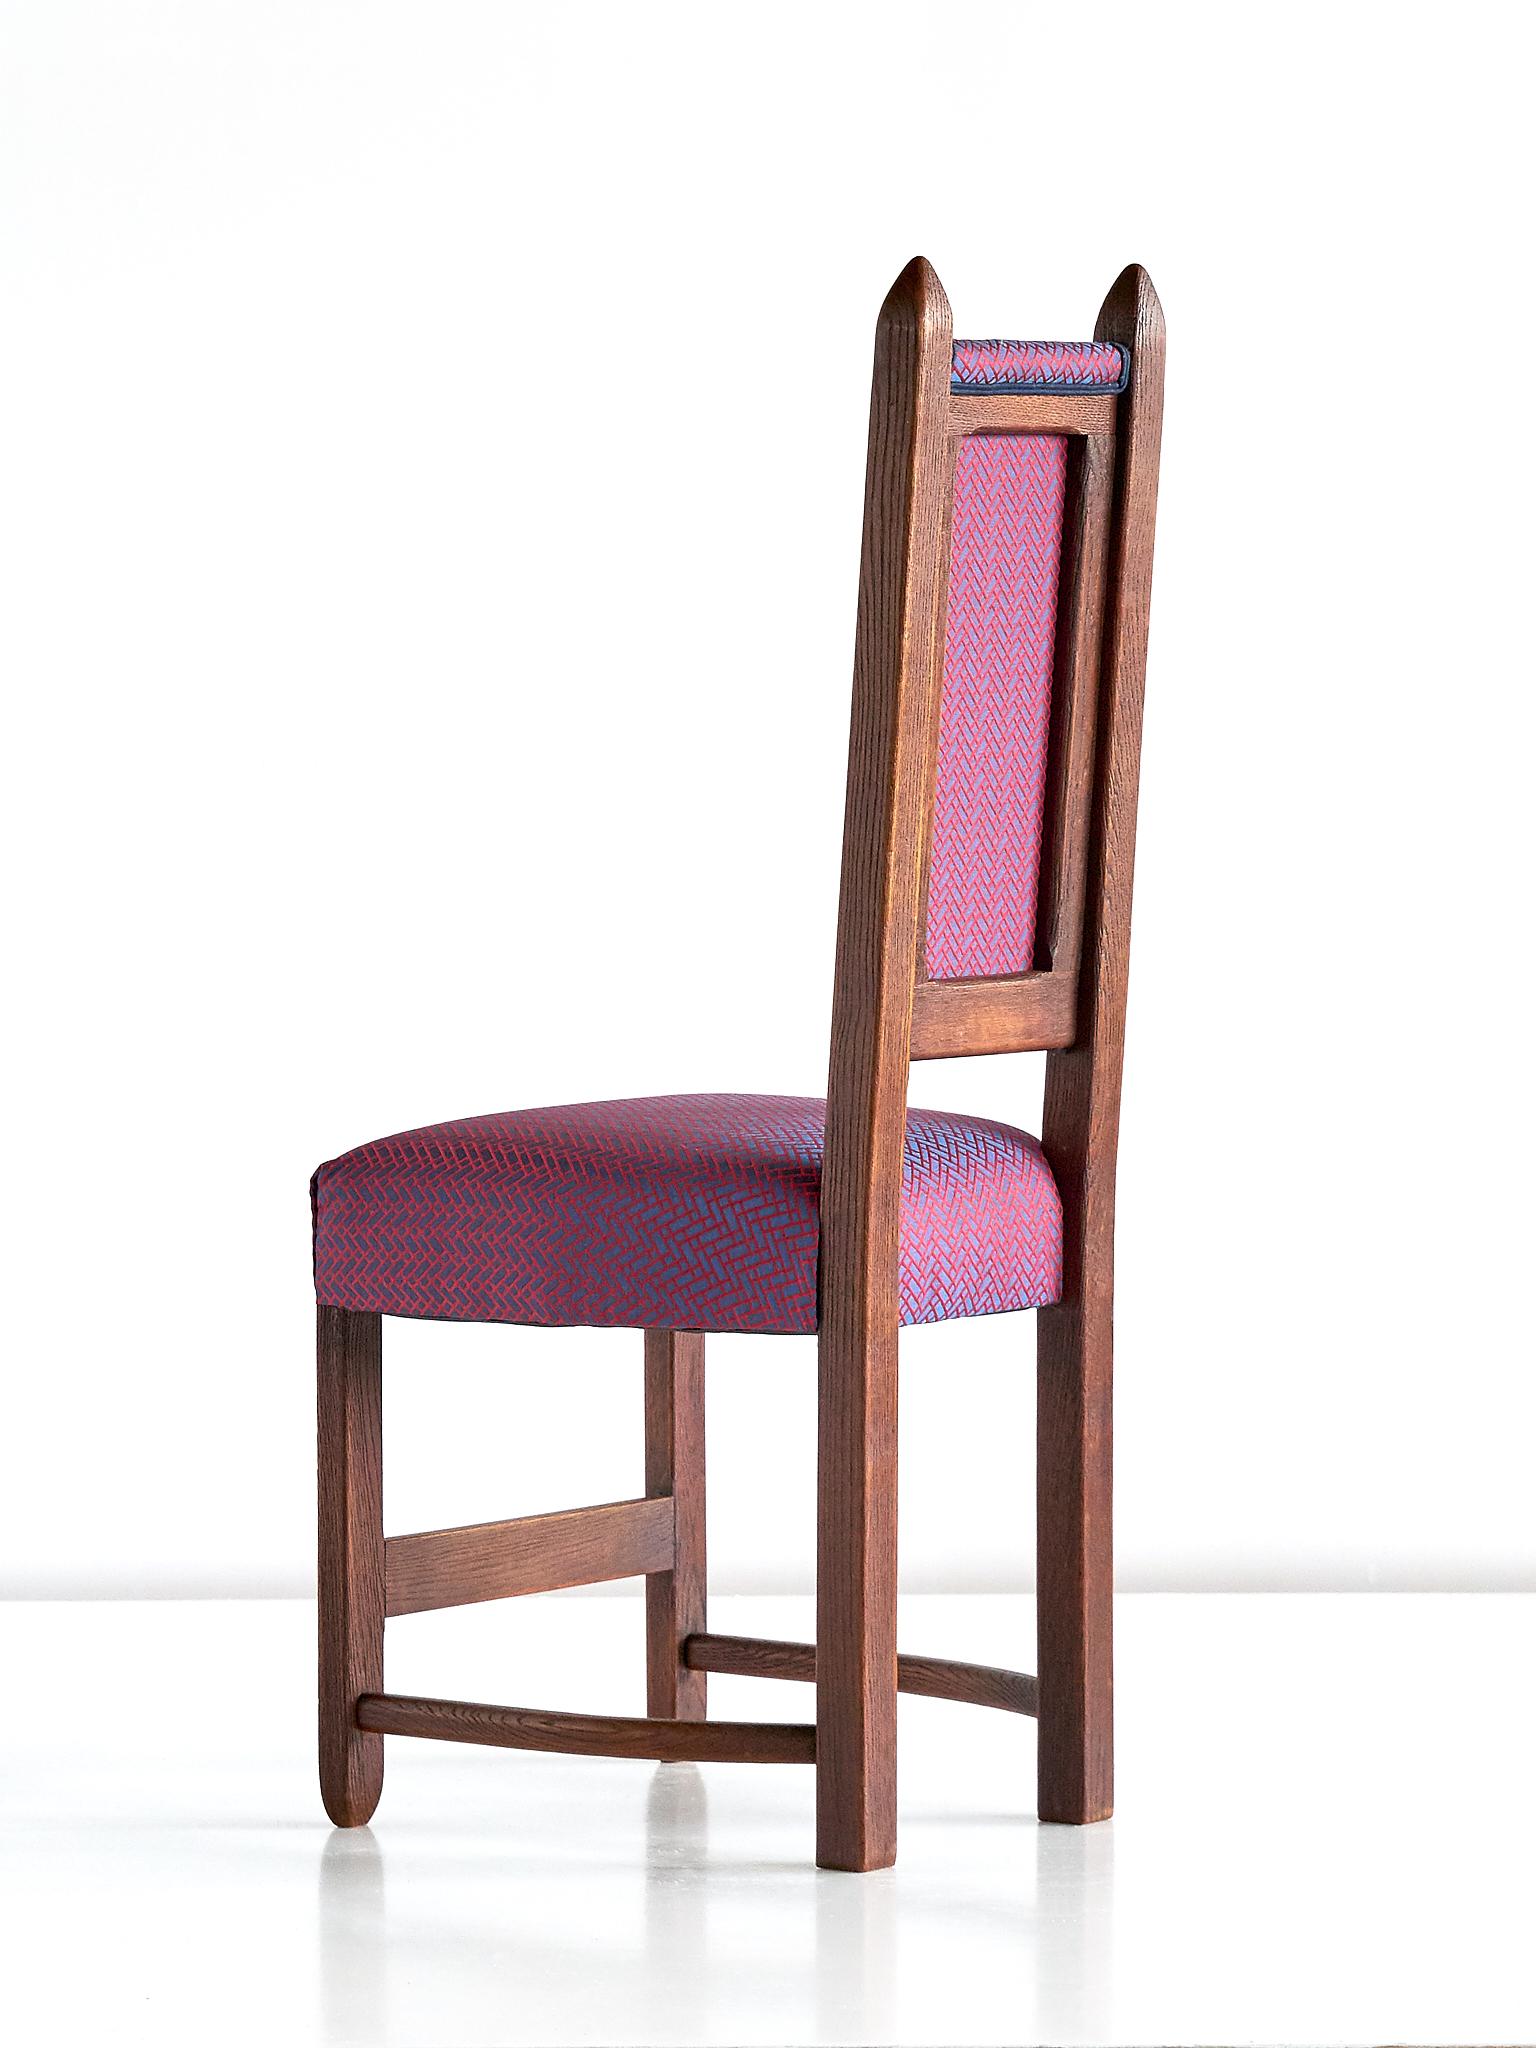 Upholstery Set of Four Amsterdam School Chairs in Oak and Hermès Jacquard Fabric, 1920s